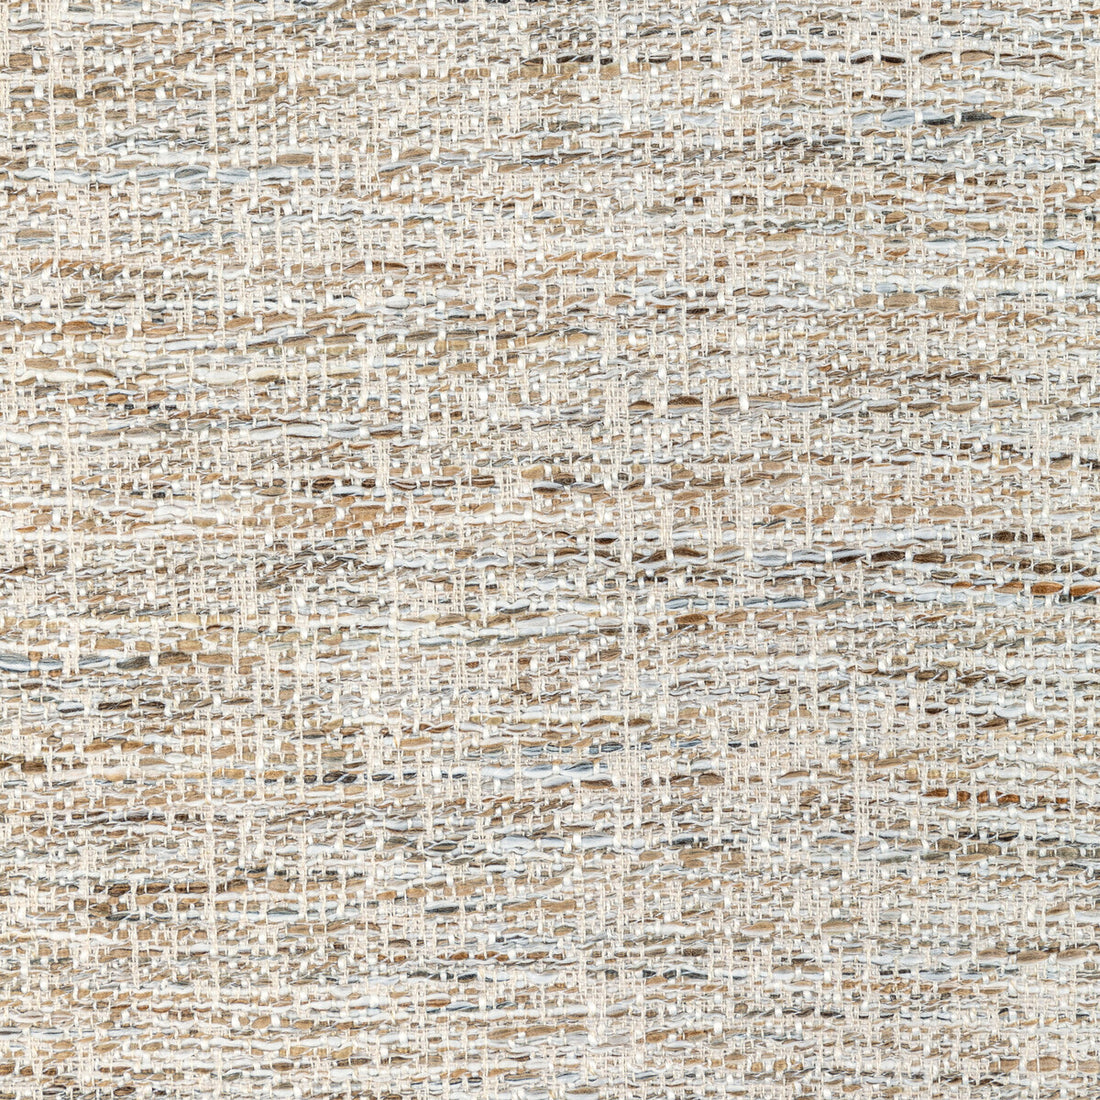 Carnel Texture fabric in pebble color - pattern 8022112.1611.0 - by Brunschwig &amp; Fils in the Lorient Weaves collection